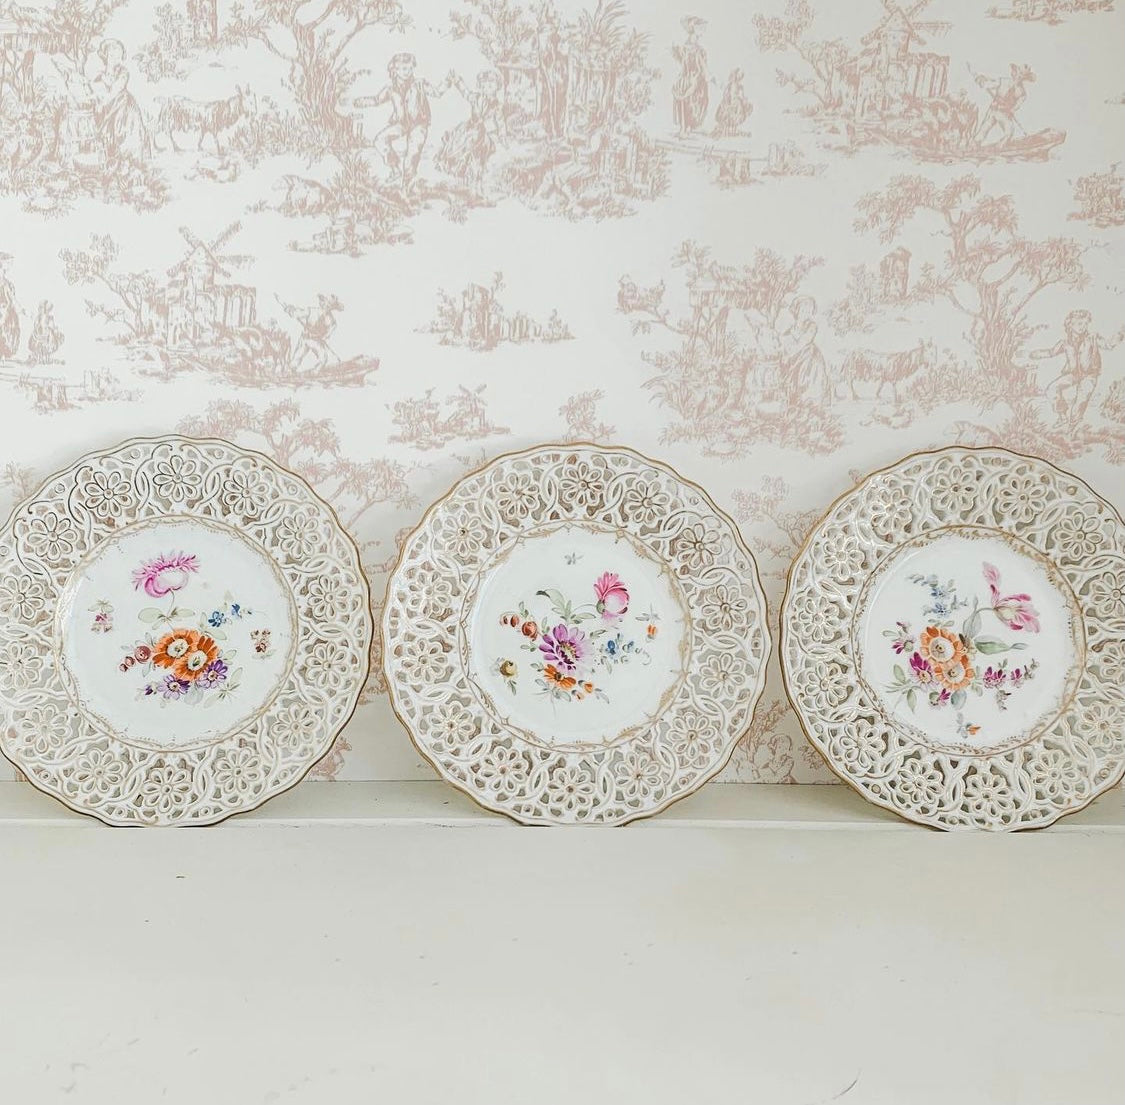 Set of Captivating Dresden Hand-Painted Plates made in Germany